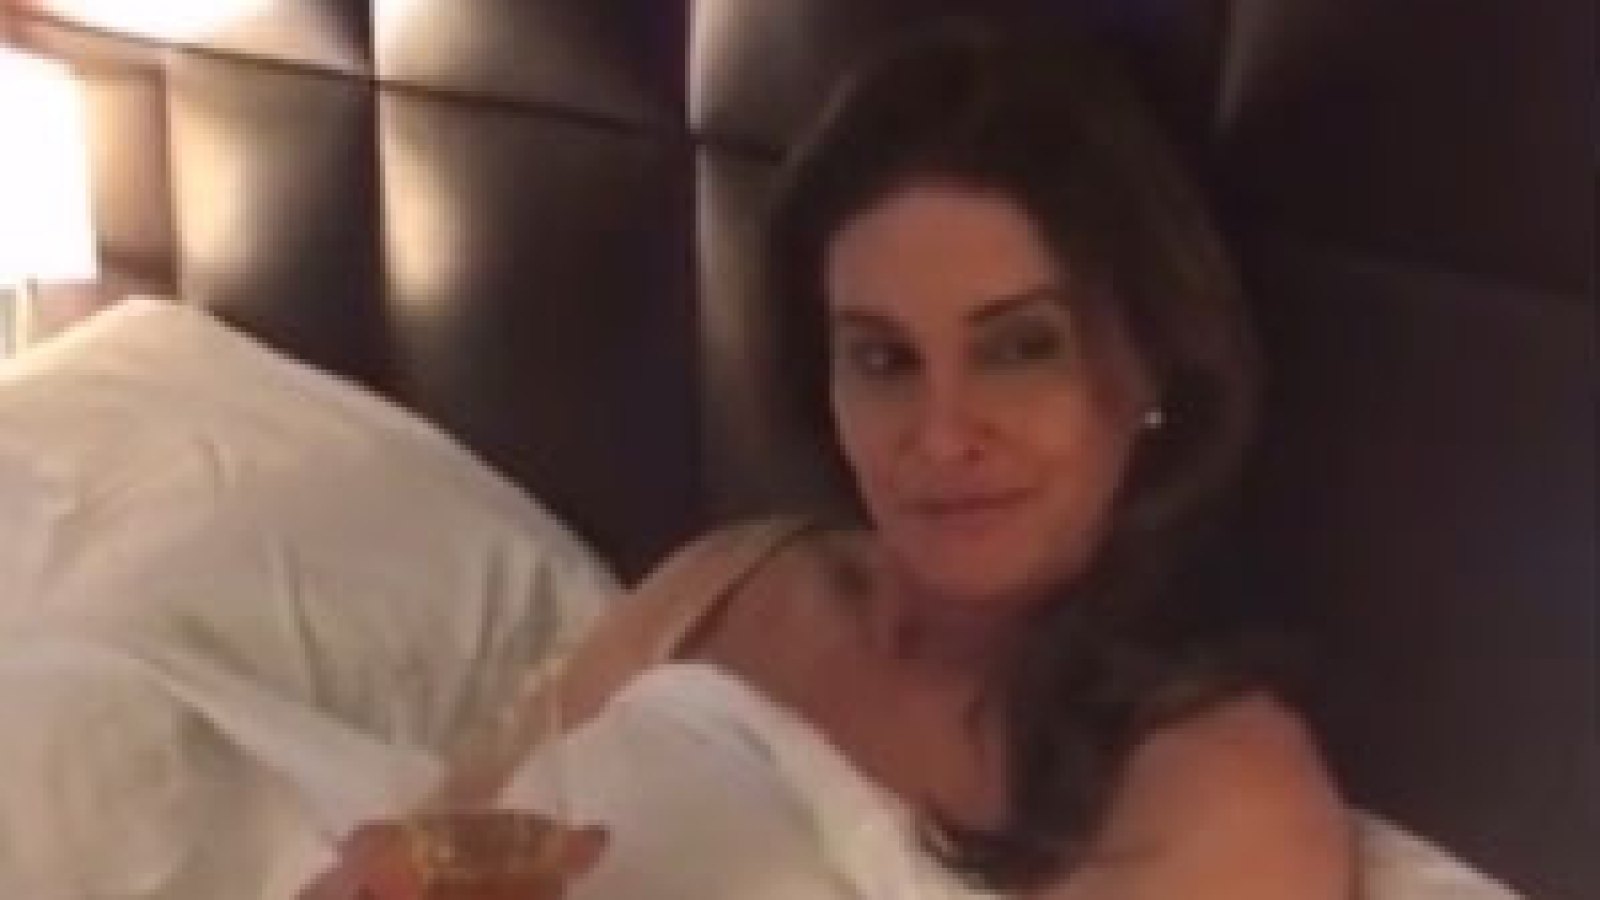 Caitlyn Jenner smiles seductively in Kylie Jenner's Snapchat movie